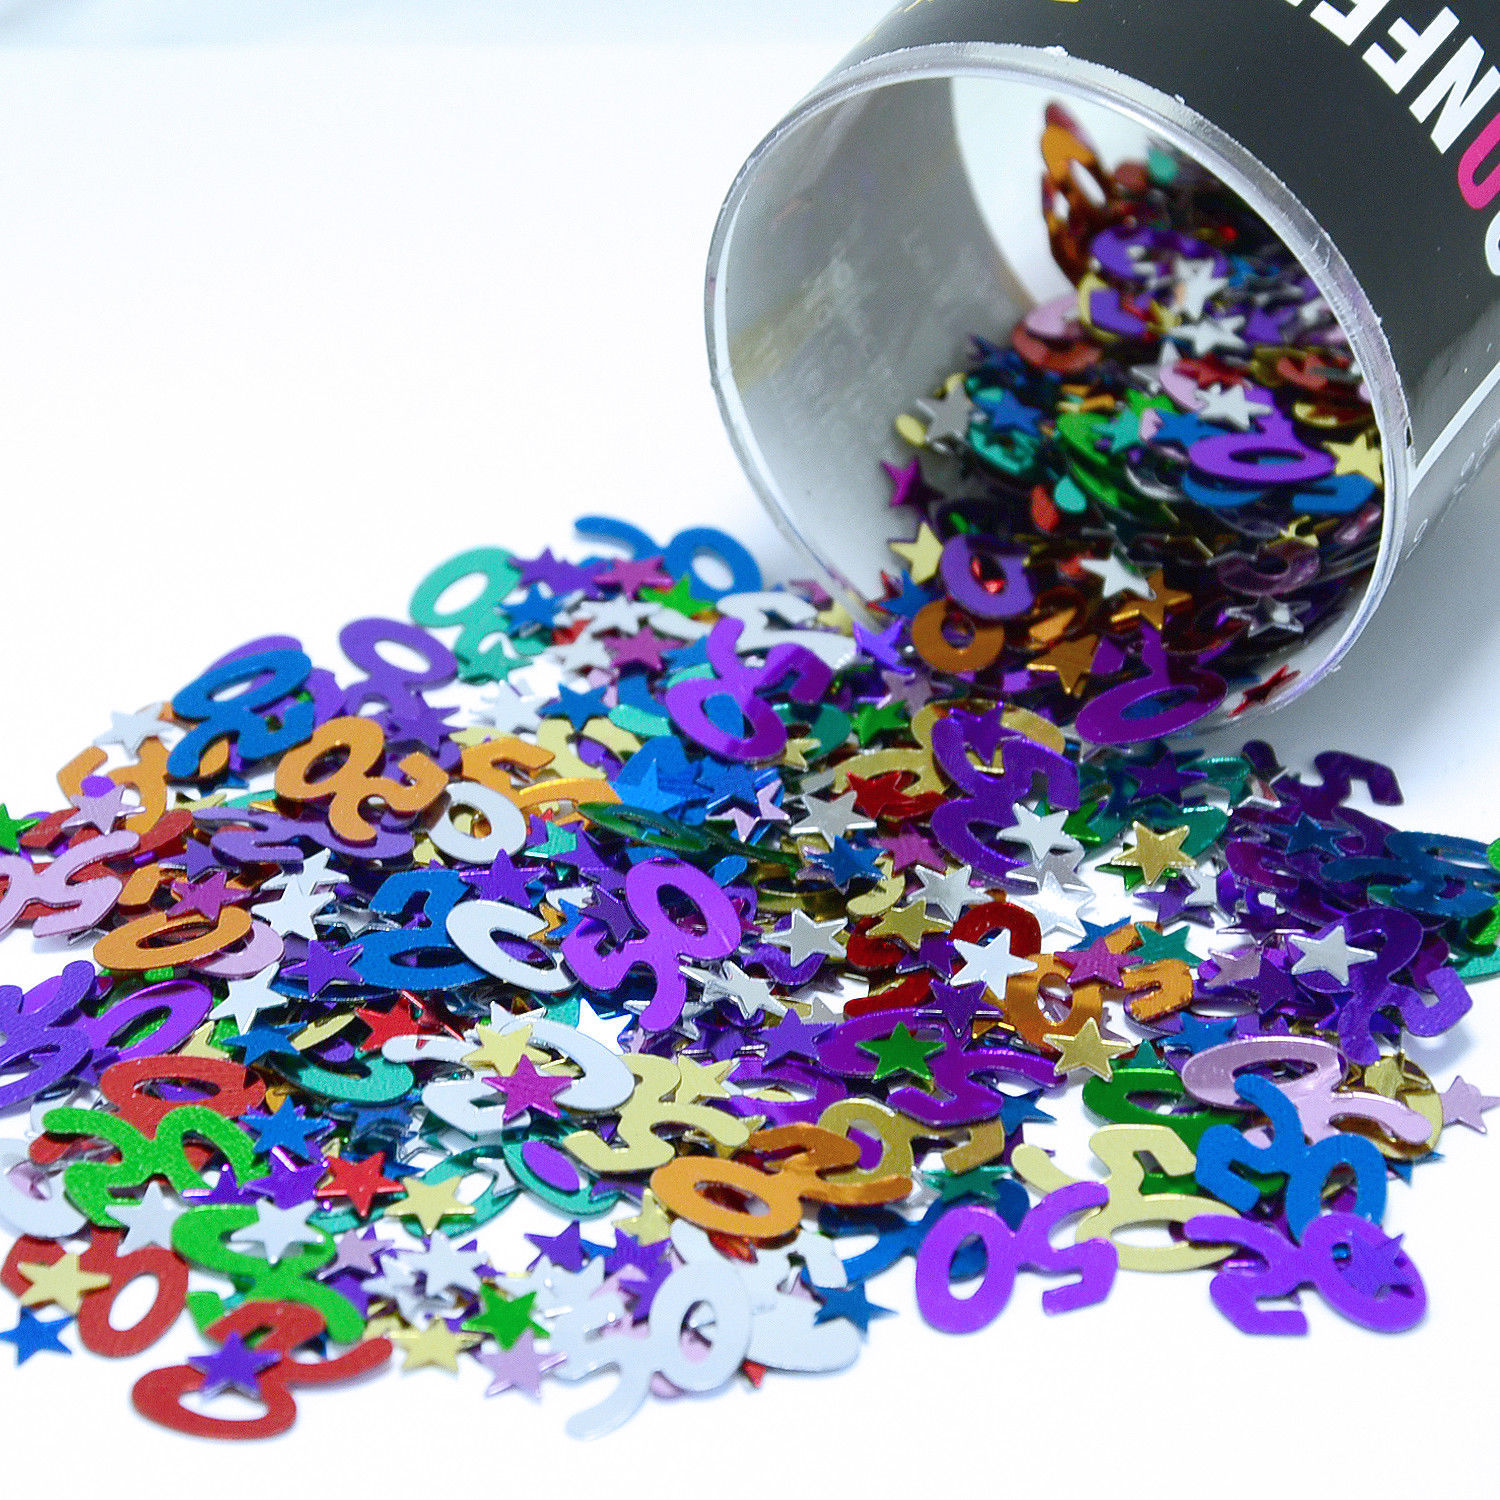 Number 50 and Stars Multicolor Confetti Bag 1/2 Oz FREE SHIPPING CCP9008 - $4.99 - $15.83